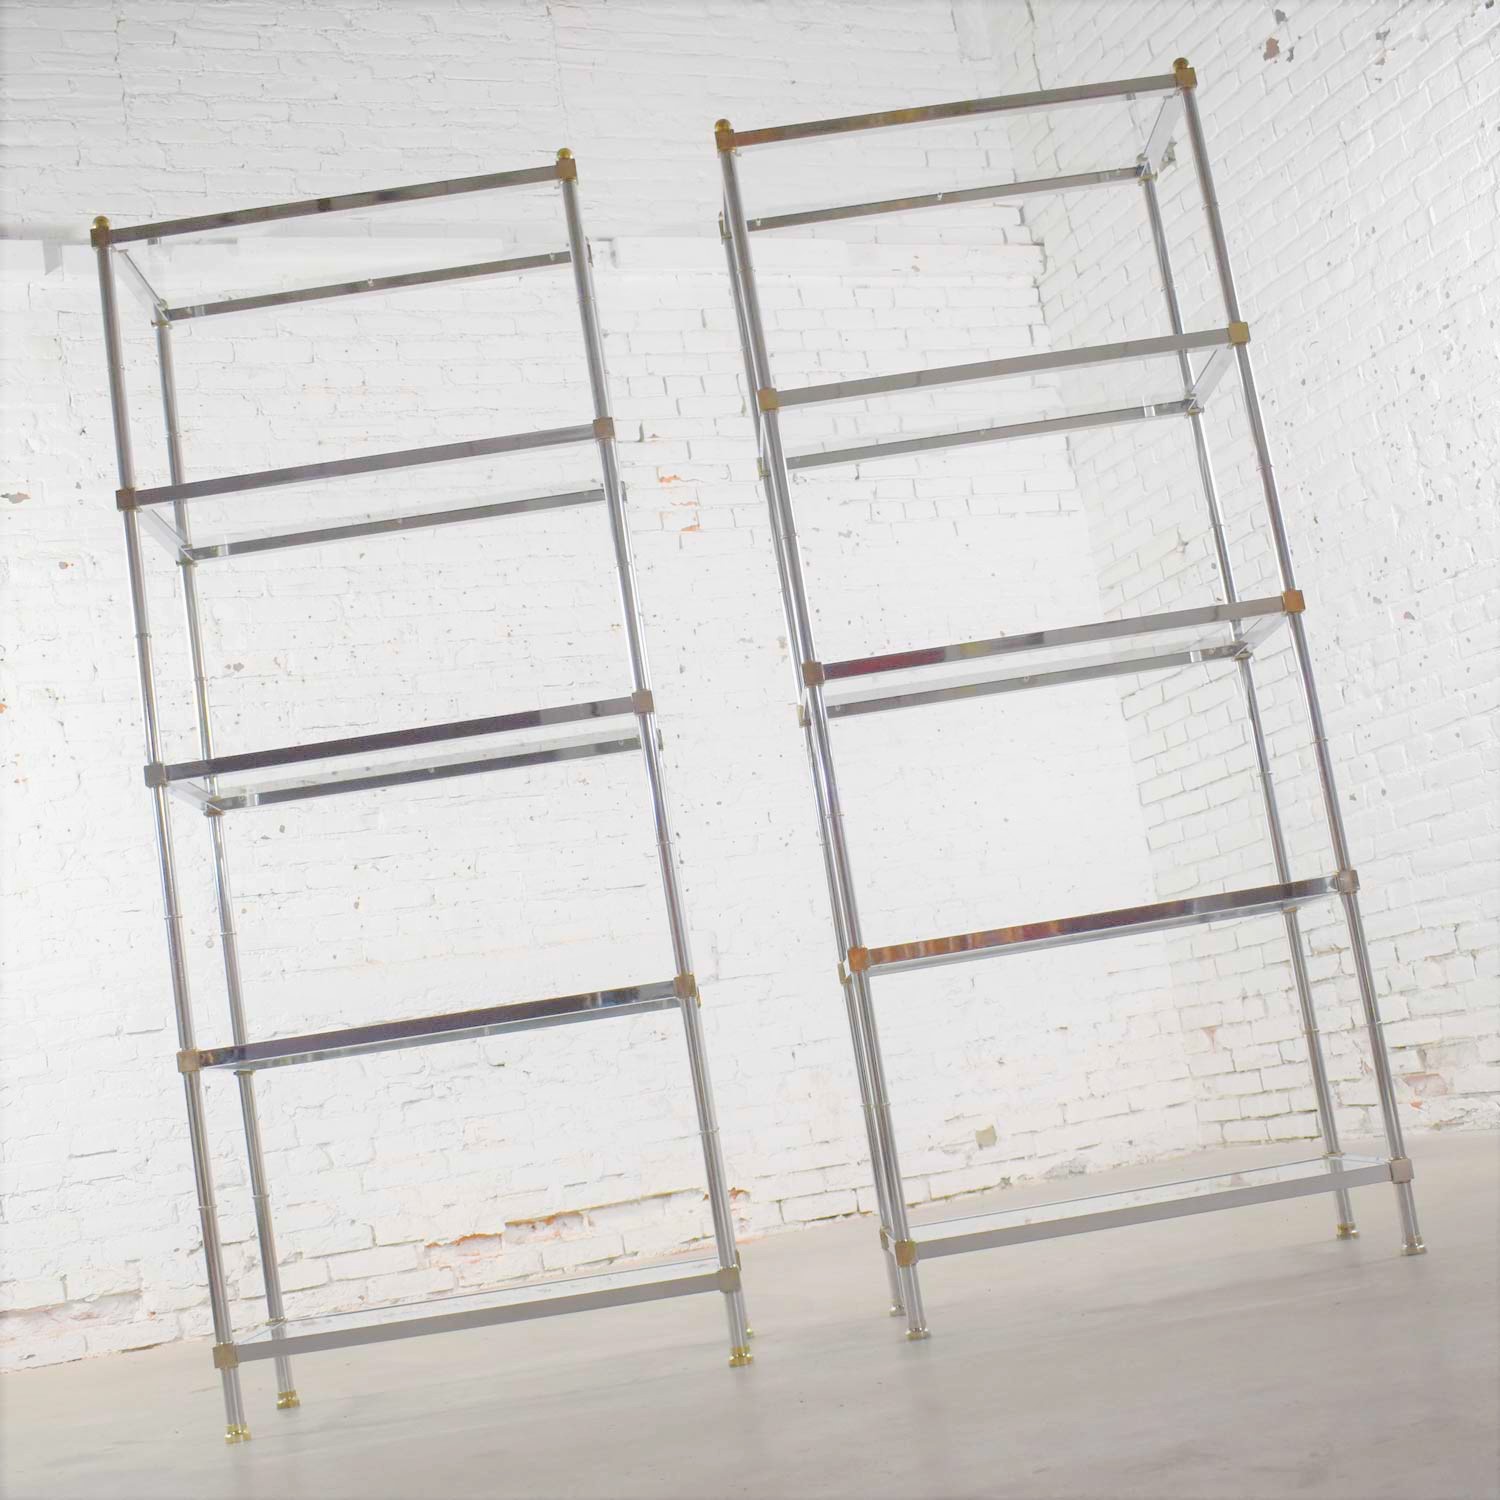 Pair of Vintage Etagere Display Shelves in Chrome and Brass, Manner of Maison Jansen